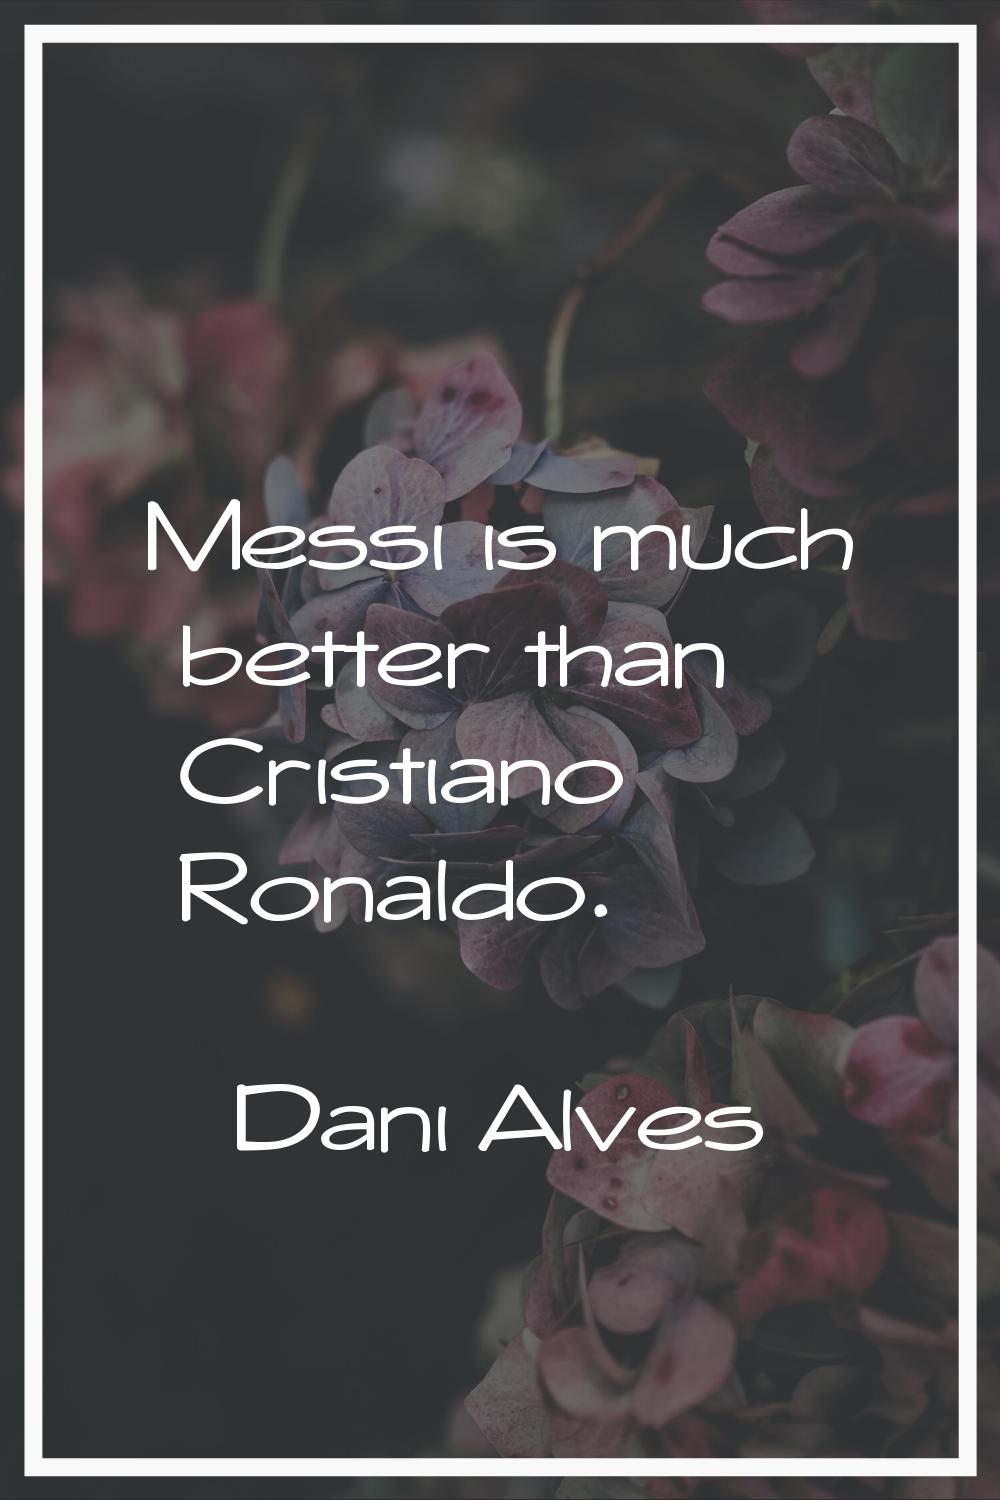 Messi is much better than Cristiano Ronaldo.